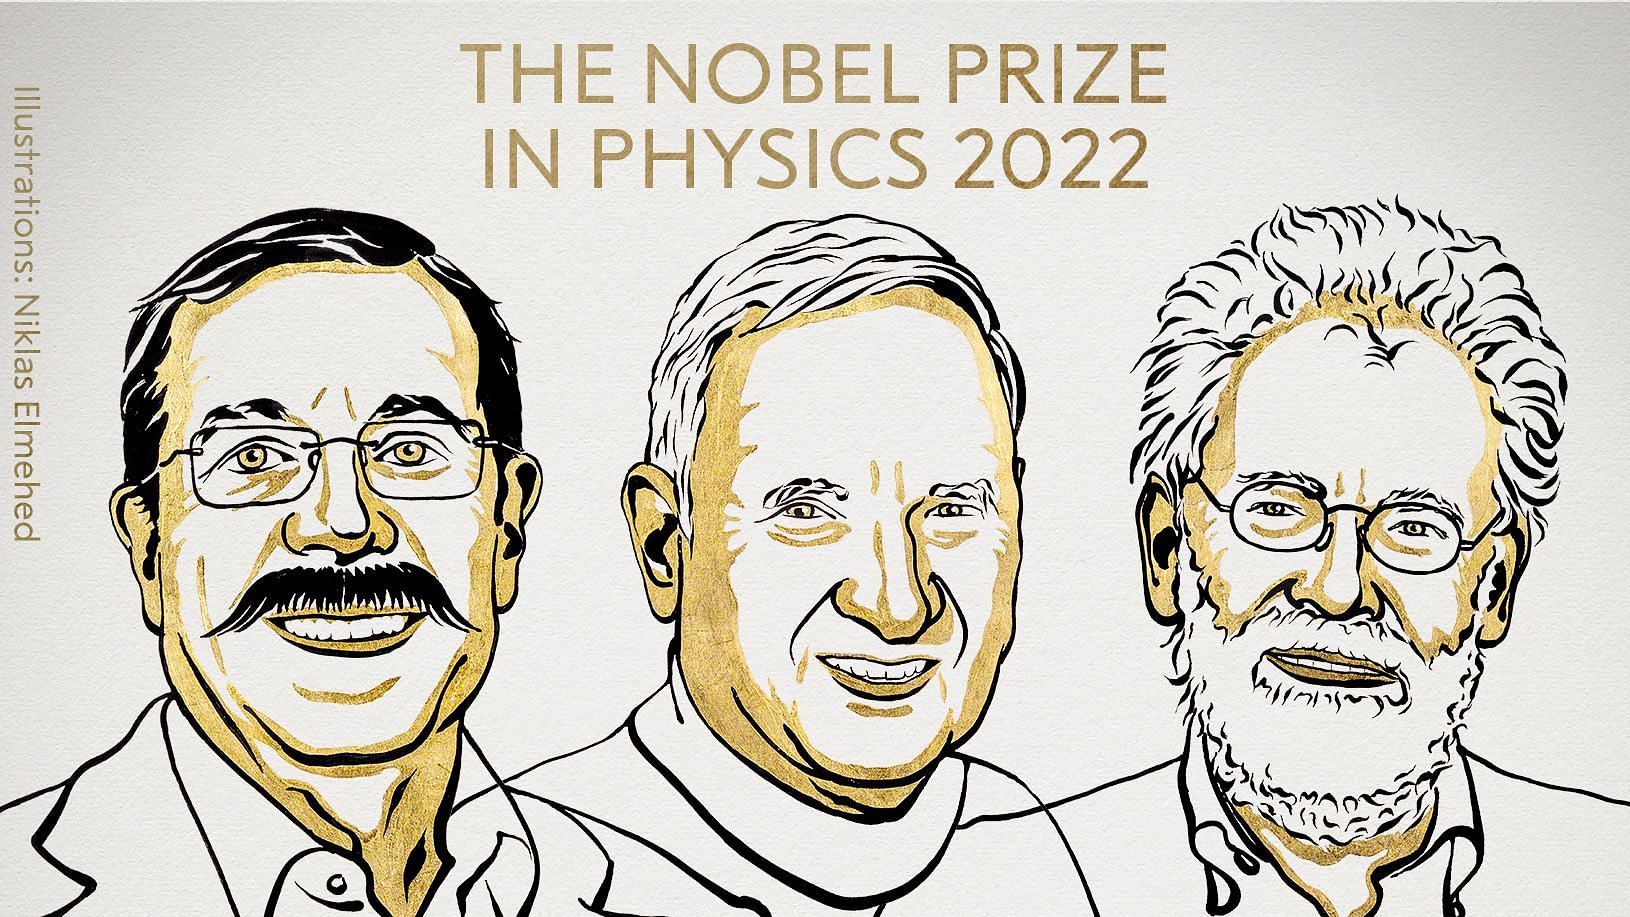 <div class="paragraphs"><p>The Nobel Prize in Physics this year was awarded to&nbsp;Alain Aspect, John F Clauser, and Anton Zeilinger.</p></div>